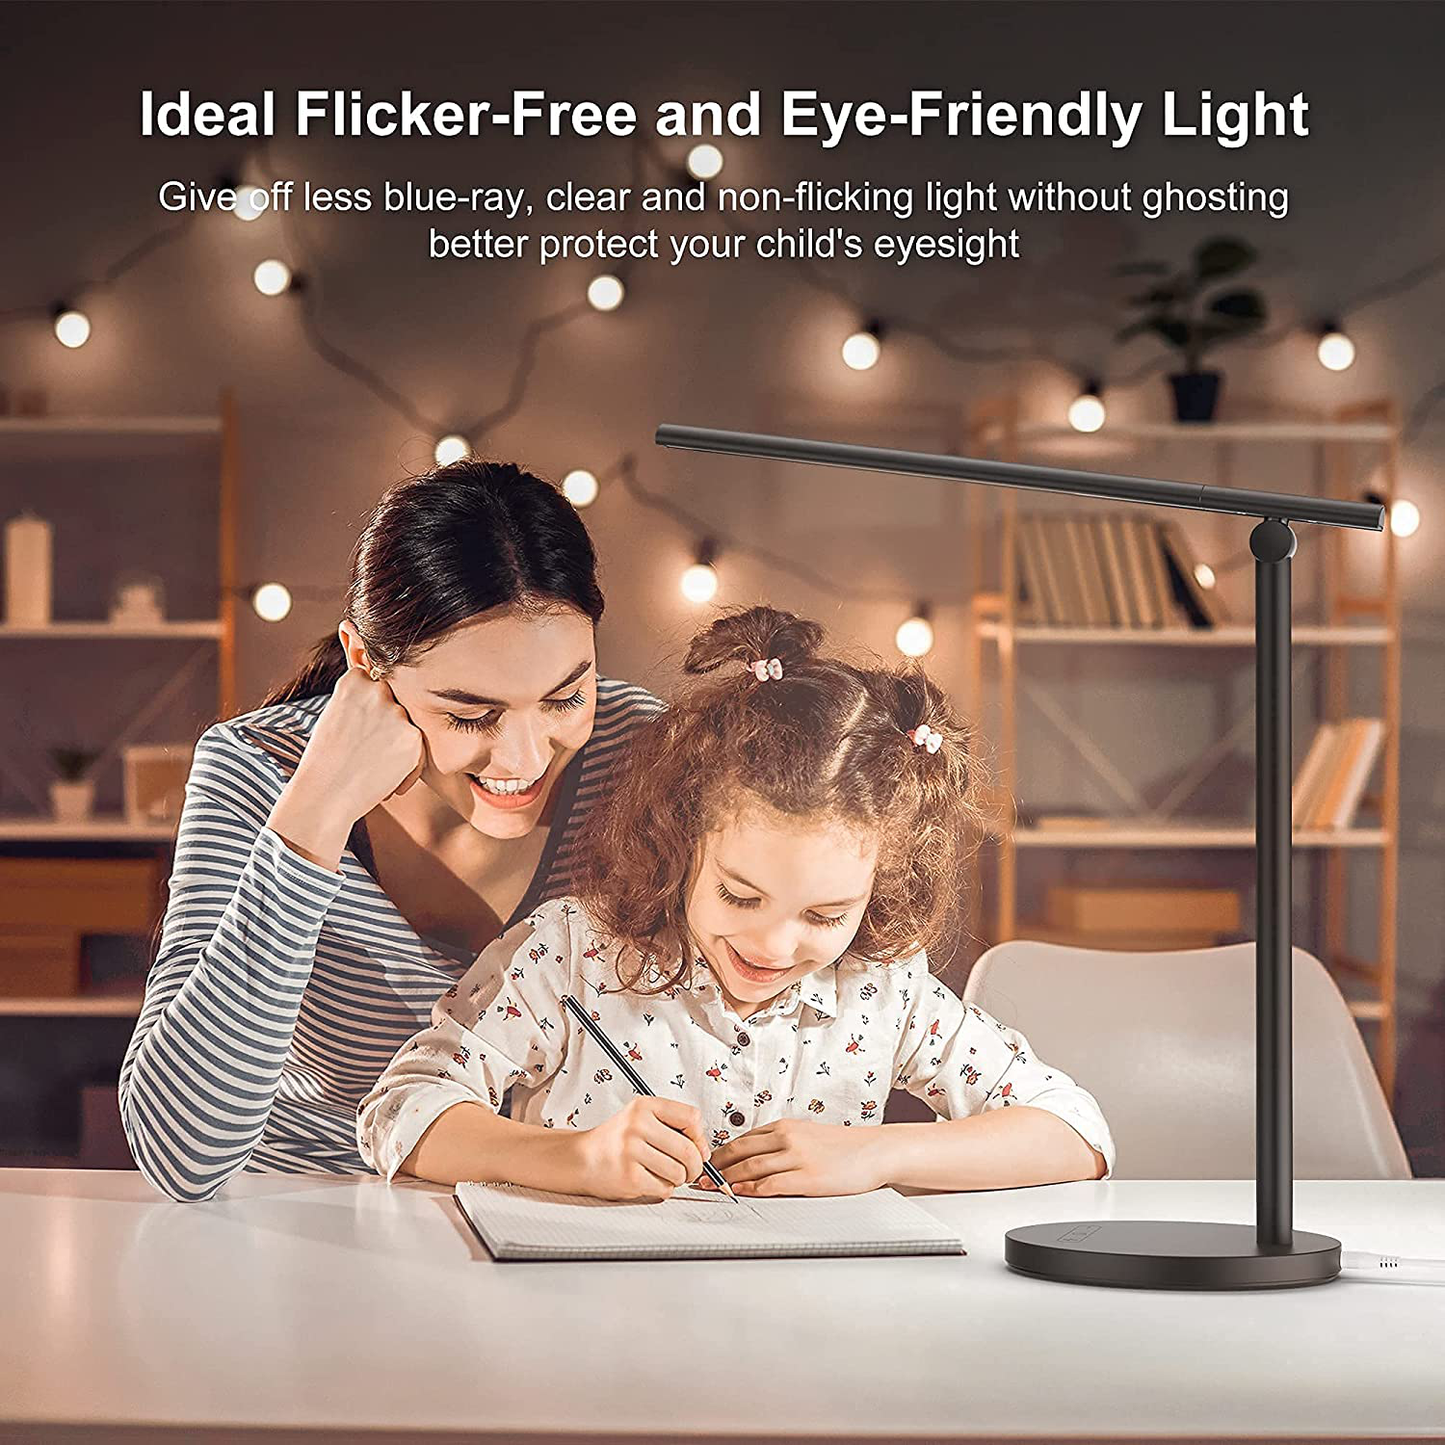 24W LED Desk Lamp, Desk Lamp with Wireless Charger, Desk Lamp for Home Office with 10W Fast Charge, Dimmable Desk Lamp with Pleless Dimming, 440Lumens, 3 Color Temperatures